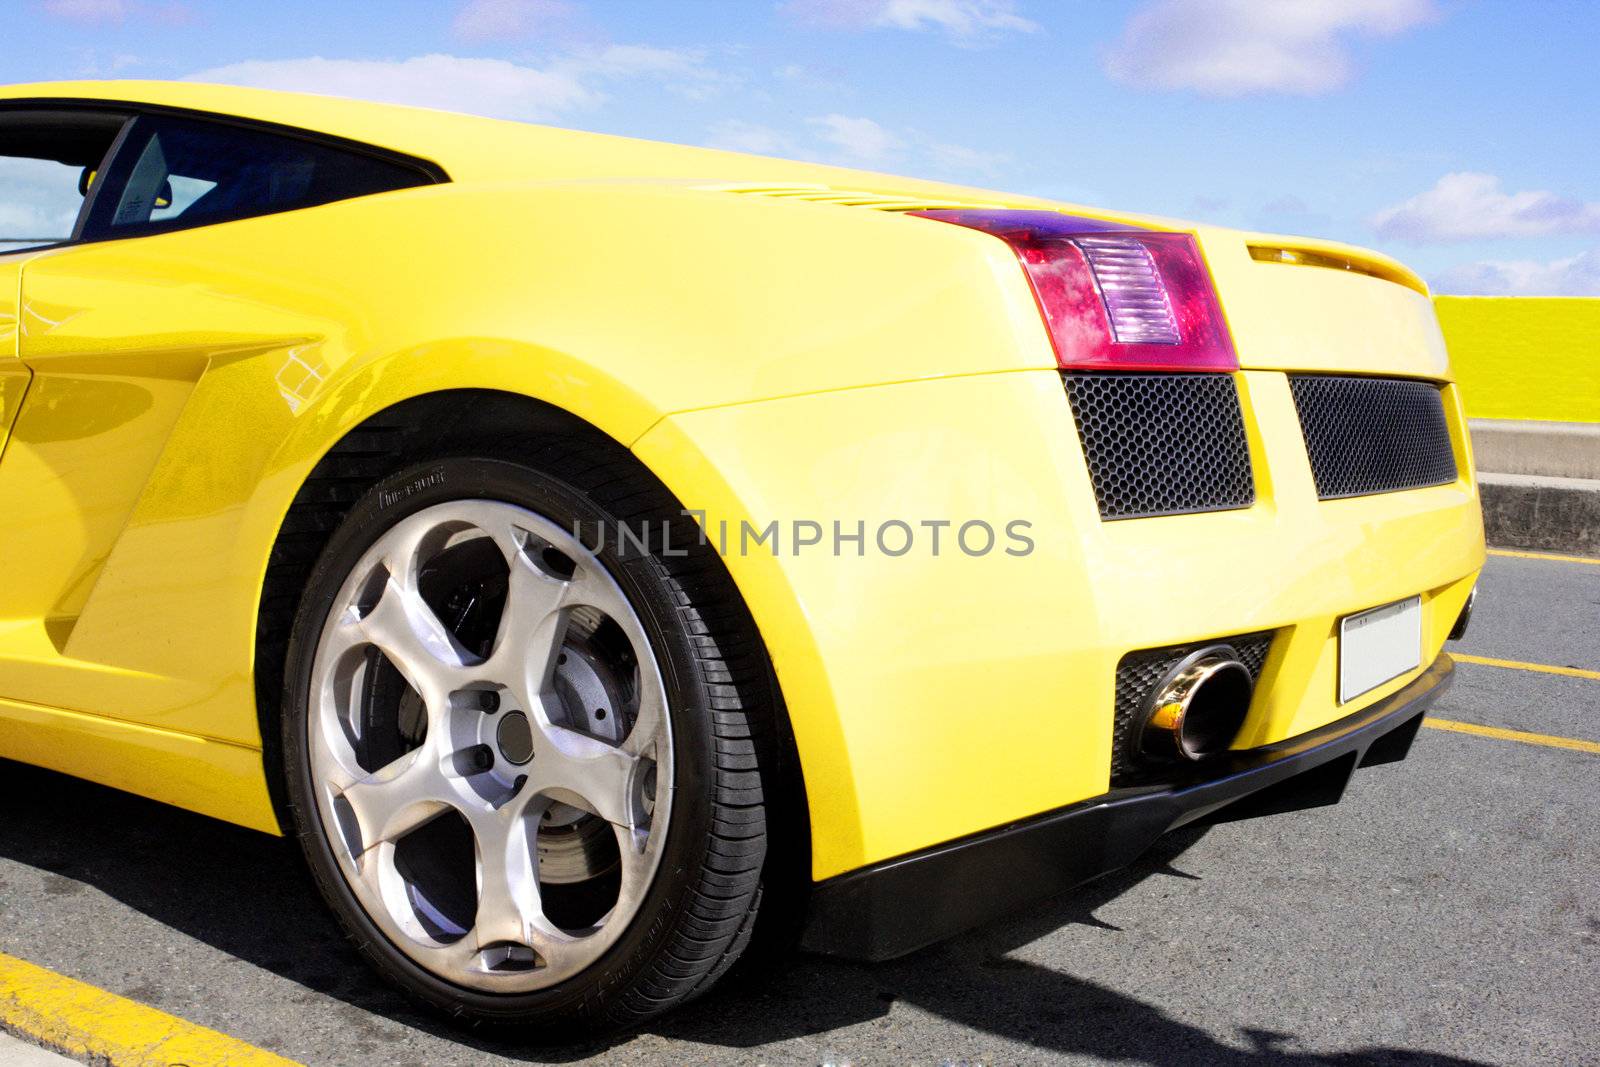 Rear view of yellow sports car